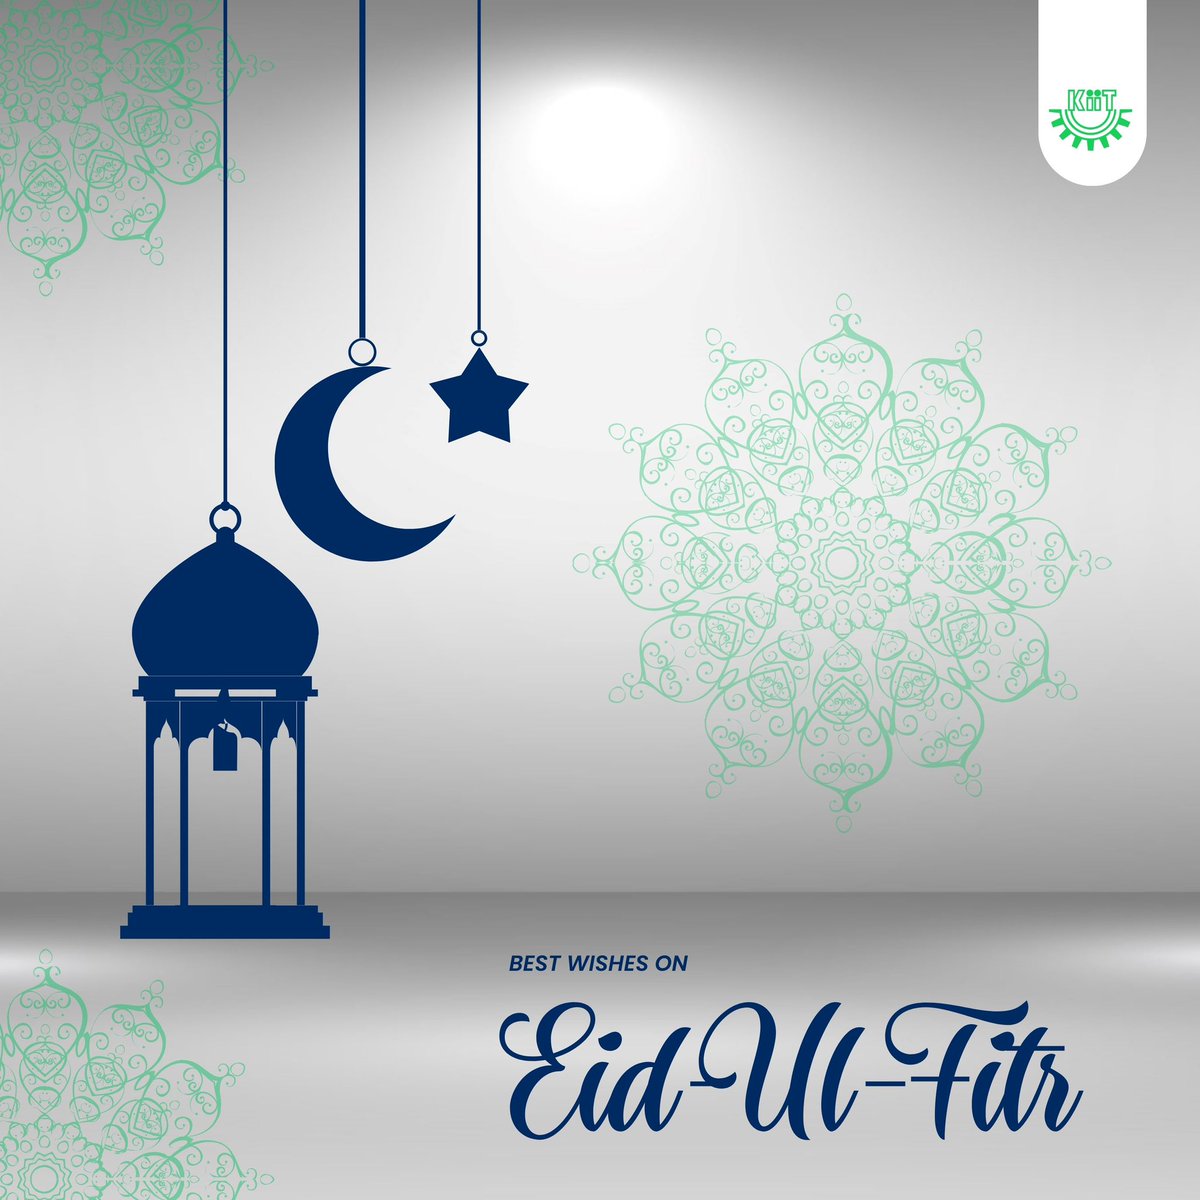 As you celebrate #Eid with family and friends, may your hearts be filled with gratitude and your homes be adorned with love and laughter. May Allah's guidance and mercy illuminate your path, granting you strength, courage, and wisdom in all your endeavours. Eid Mubarak to you and…